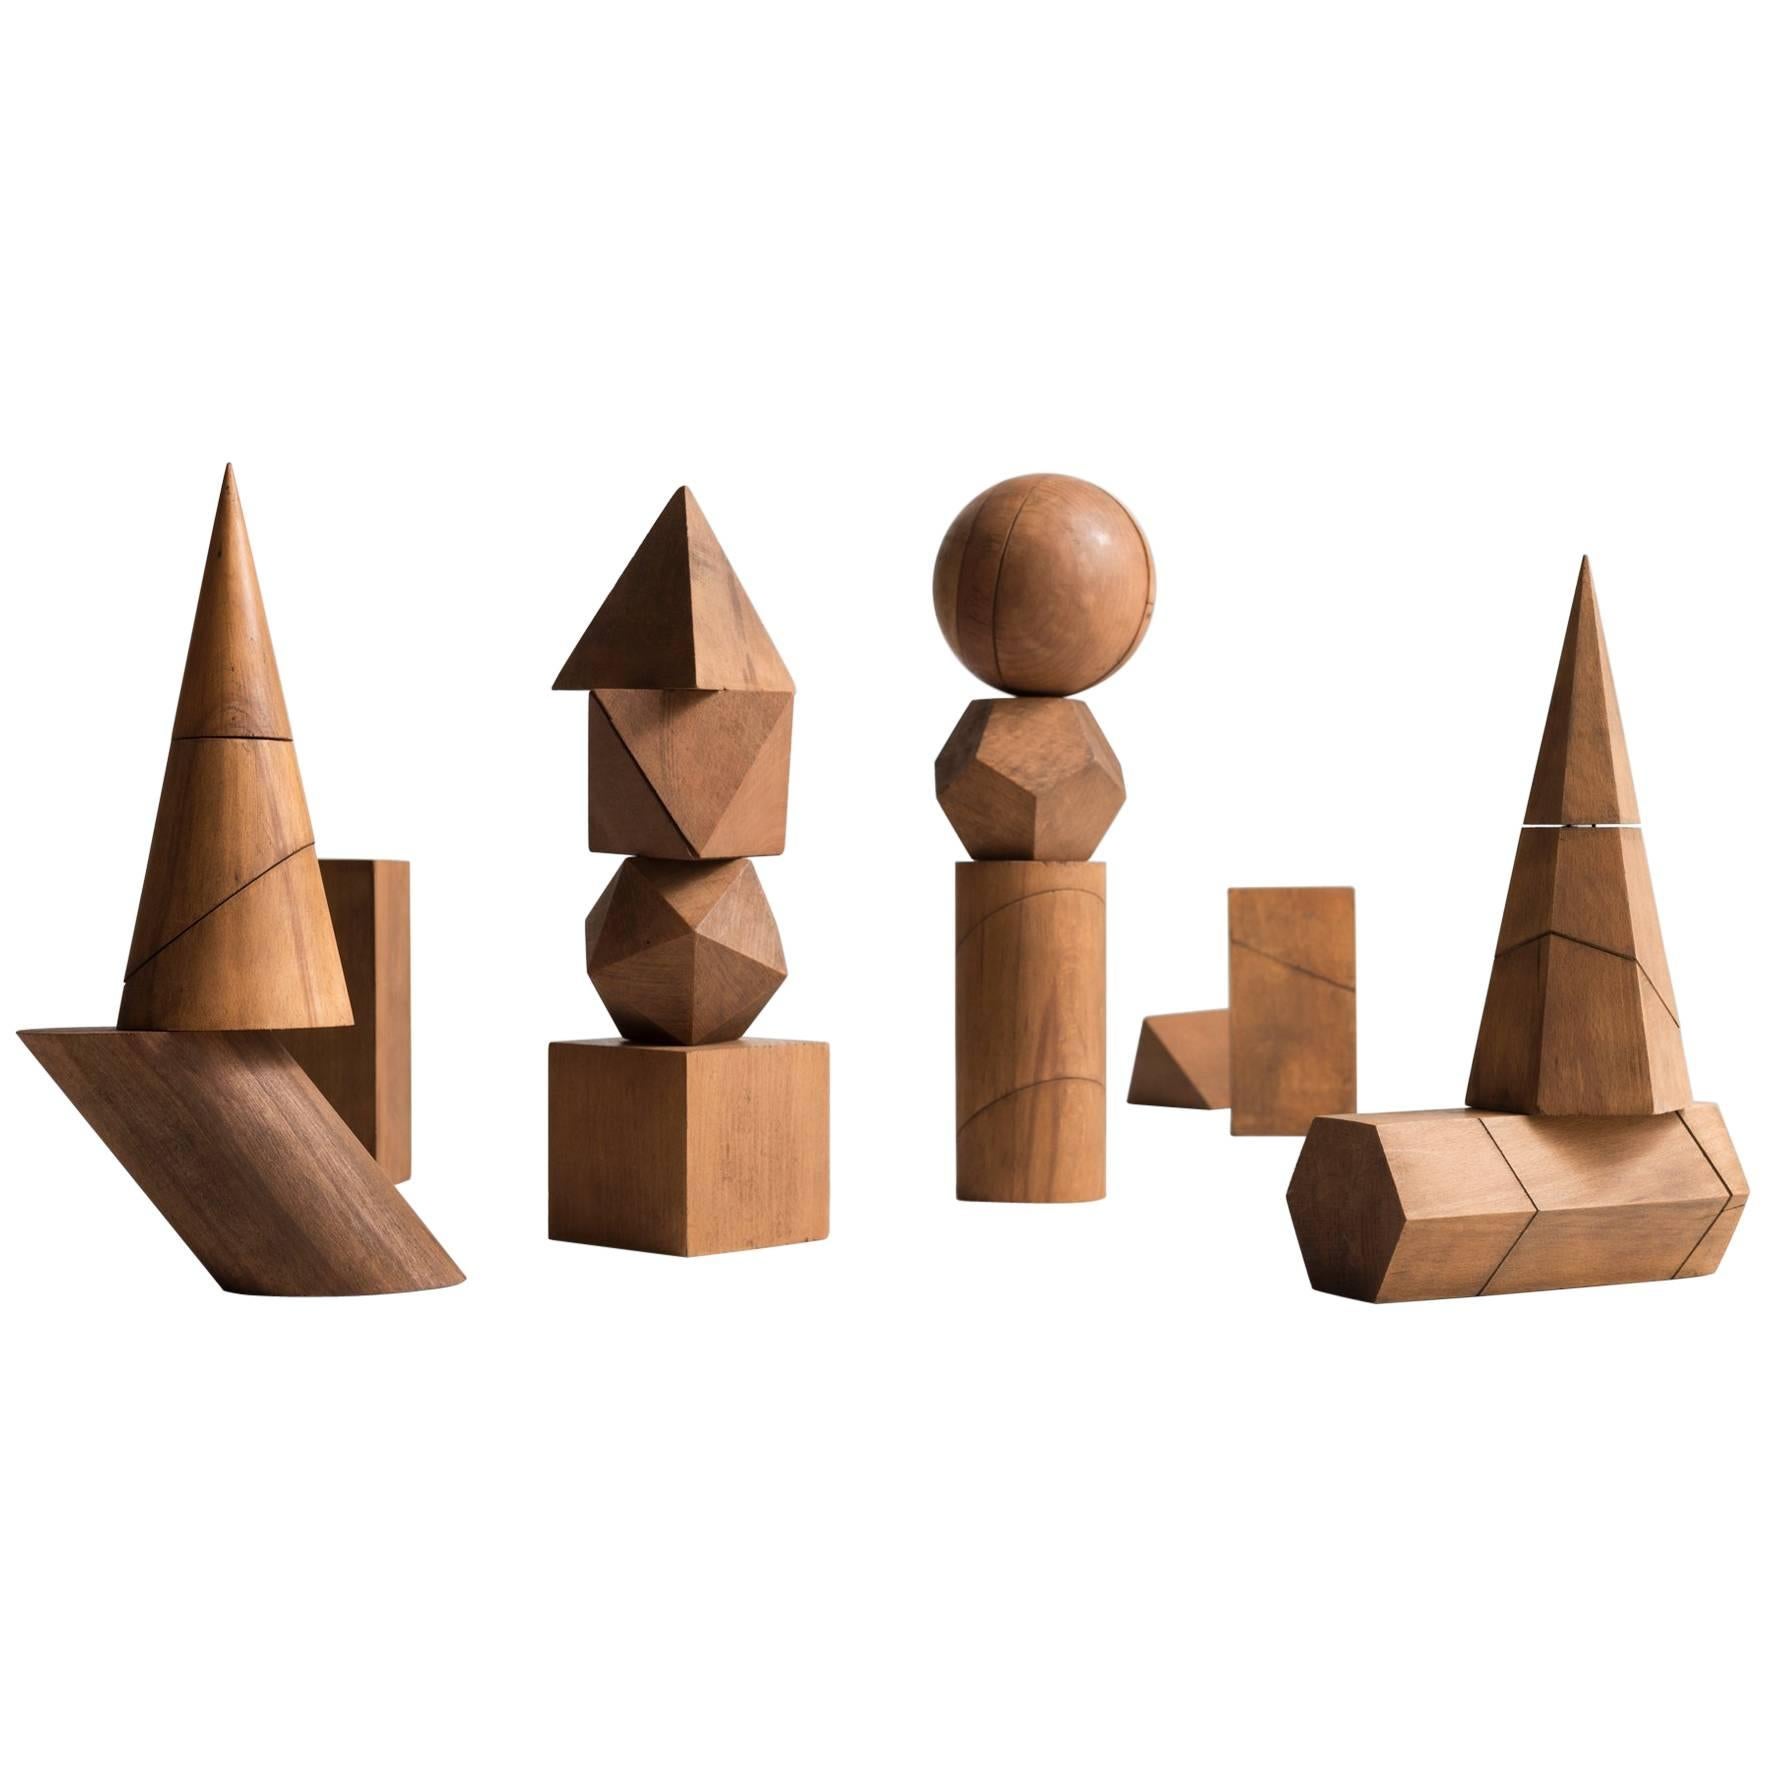 Complete Set of Wooden Geometric Forms, circa 1957